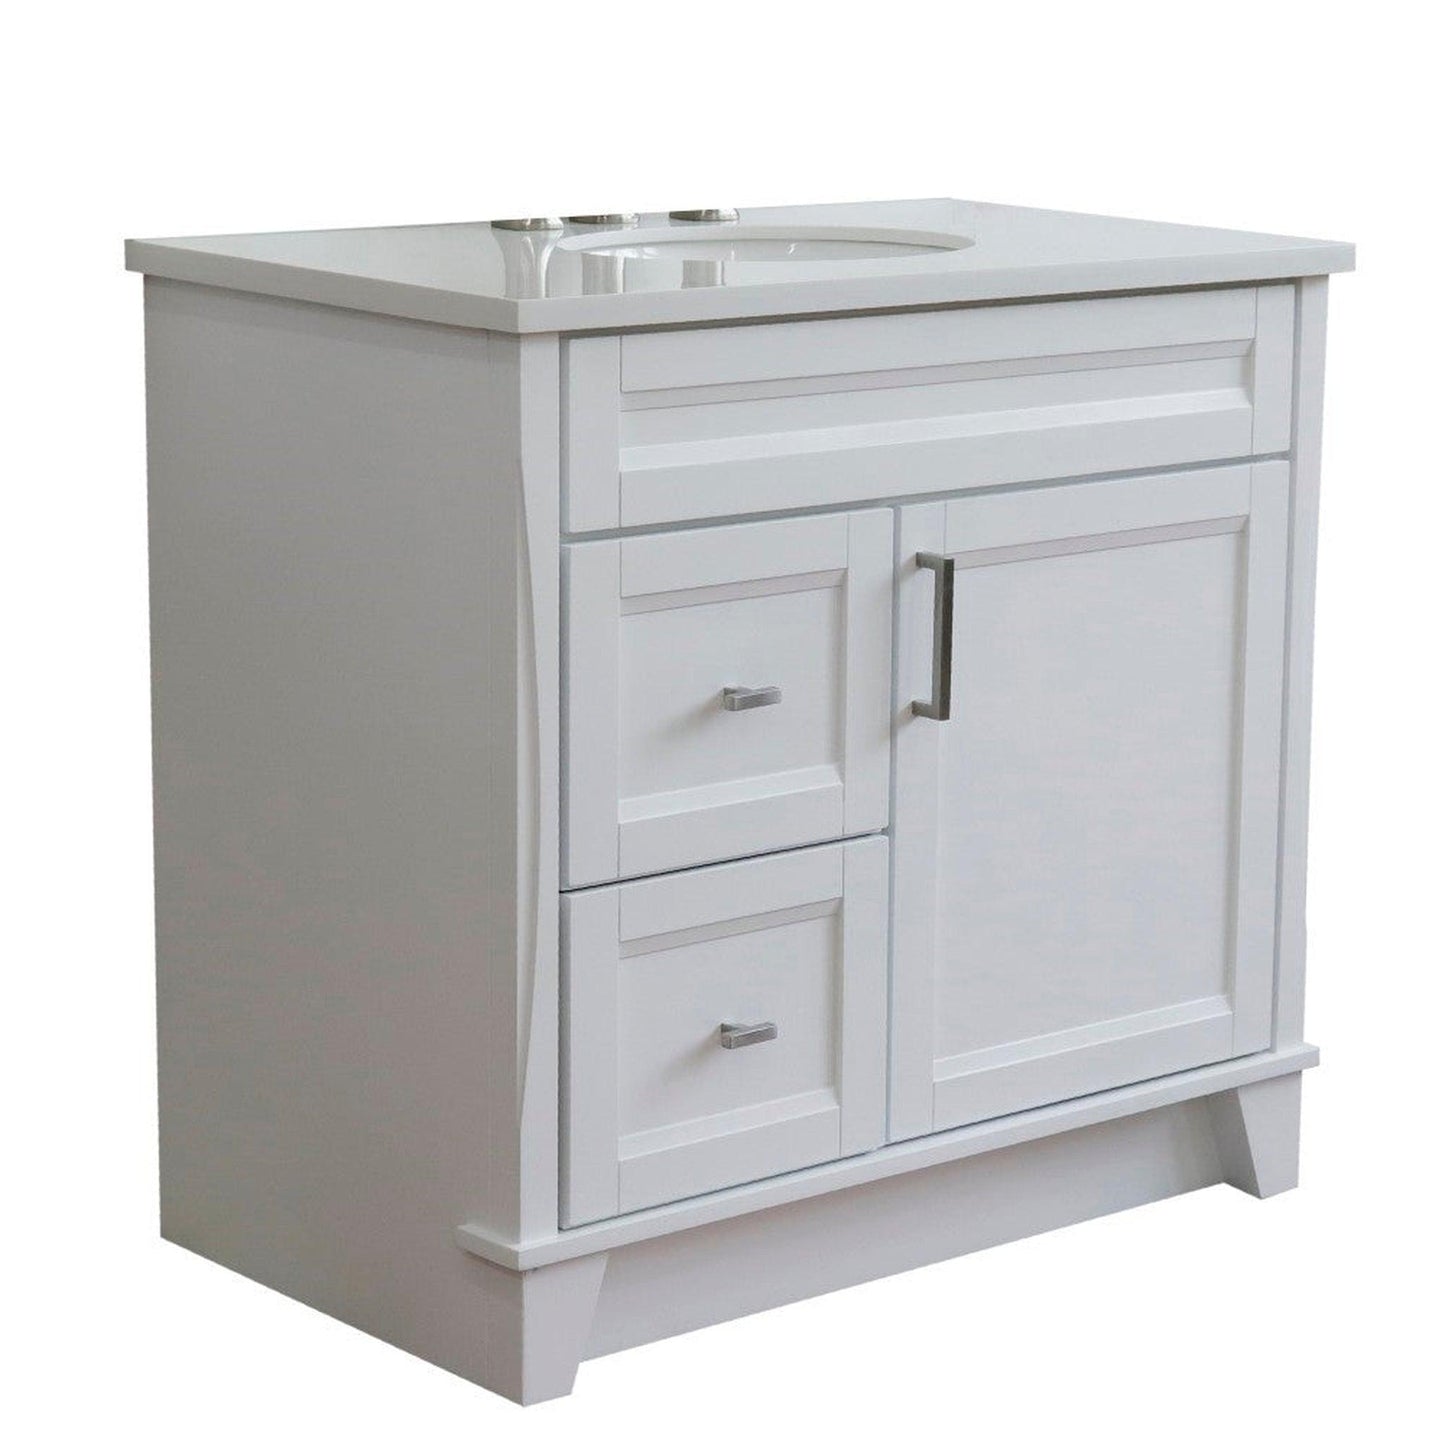 Bellaterra Home Terni 37" 1-Door 2-Drawer White Freestanding Vanity Set With Ceramic Center Undermount Oval Sink and White Quartz Top, and Right Door Base